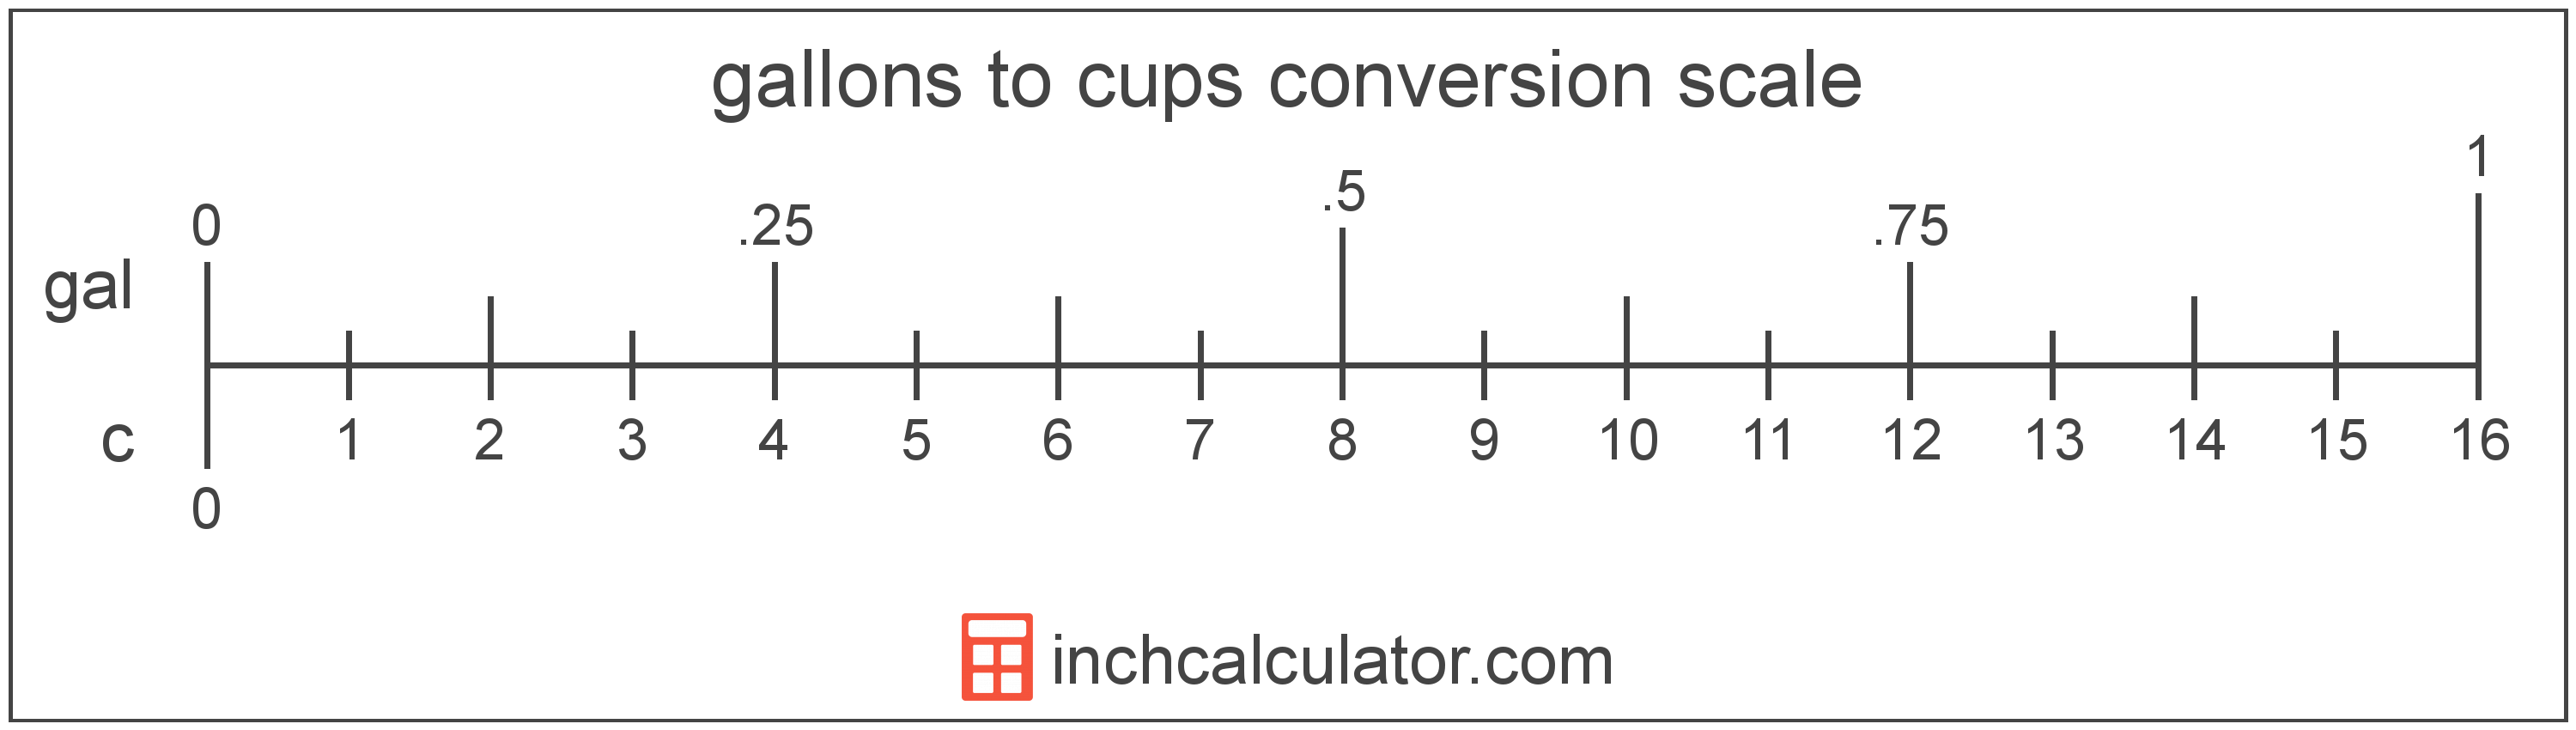 Gallons to Cups Conversion (gal to c)